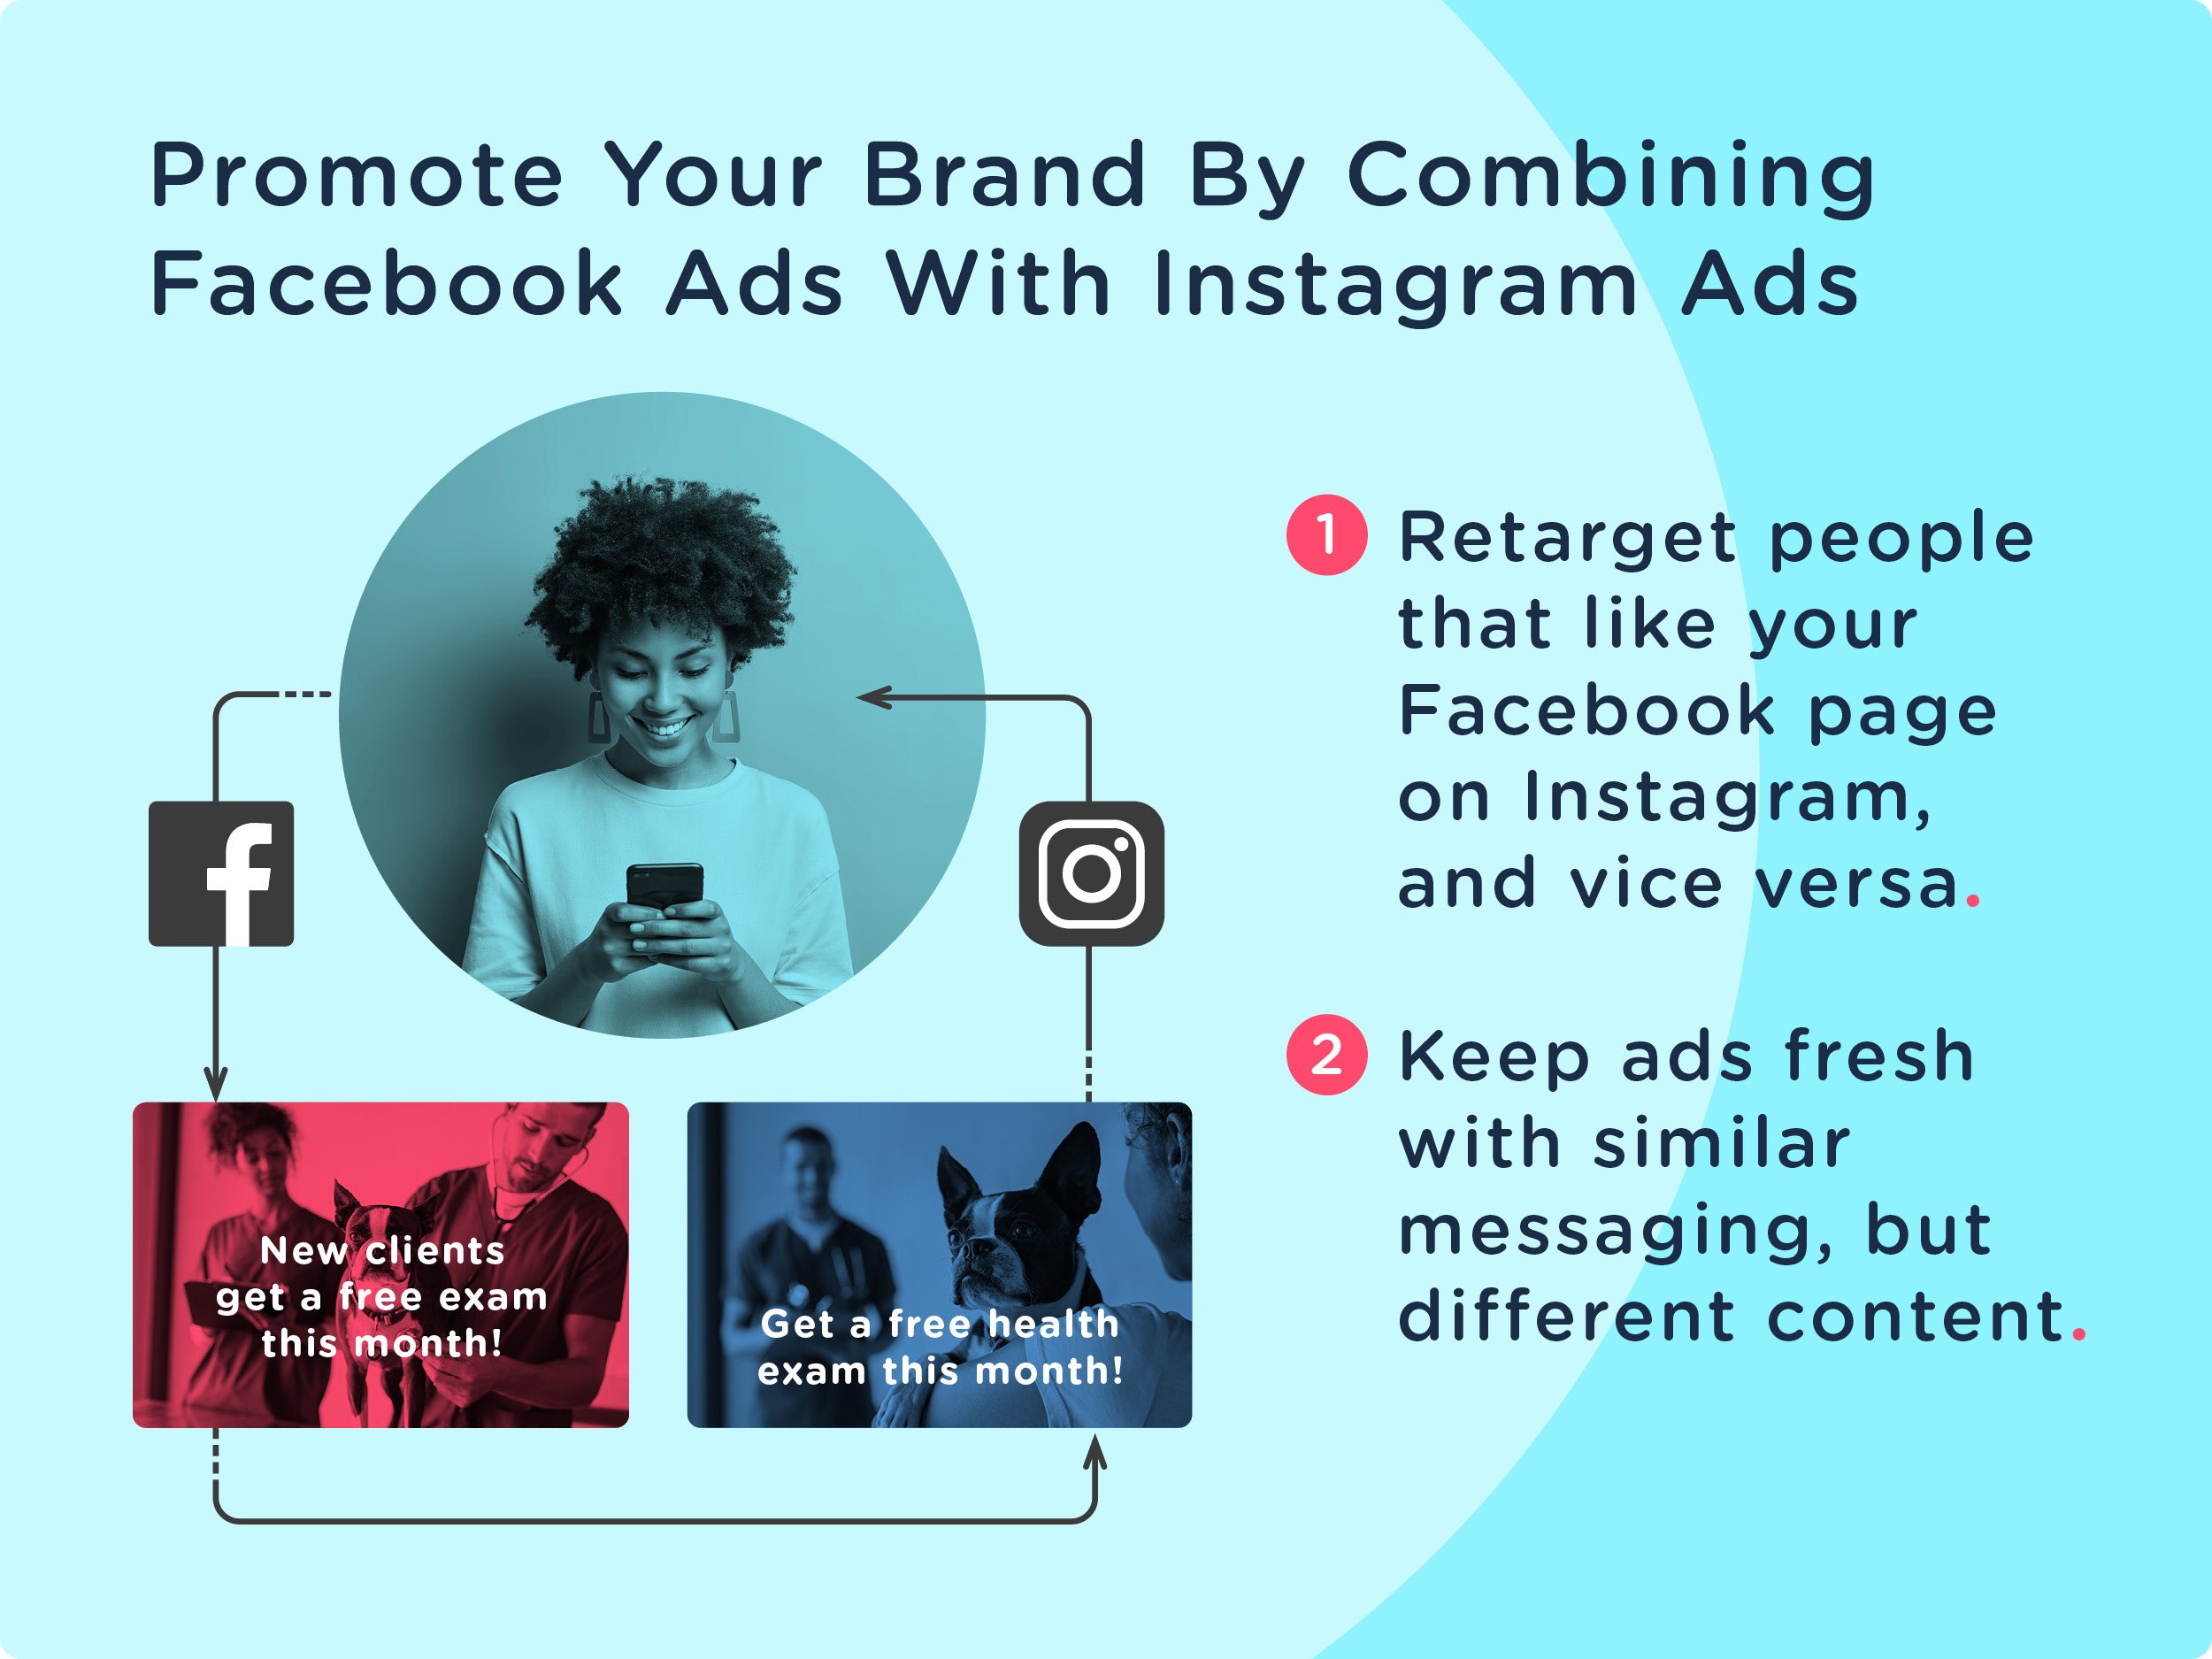 Promote your brand by combining Facebook ads with Instagram ads